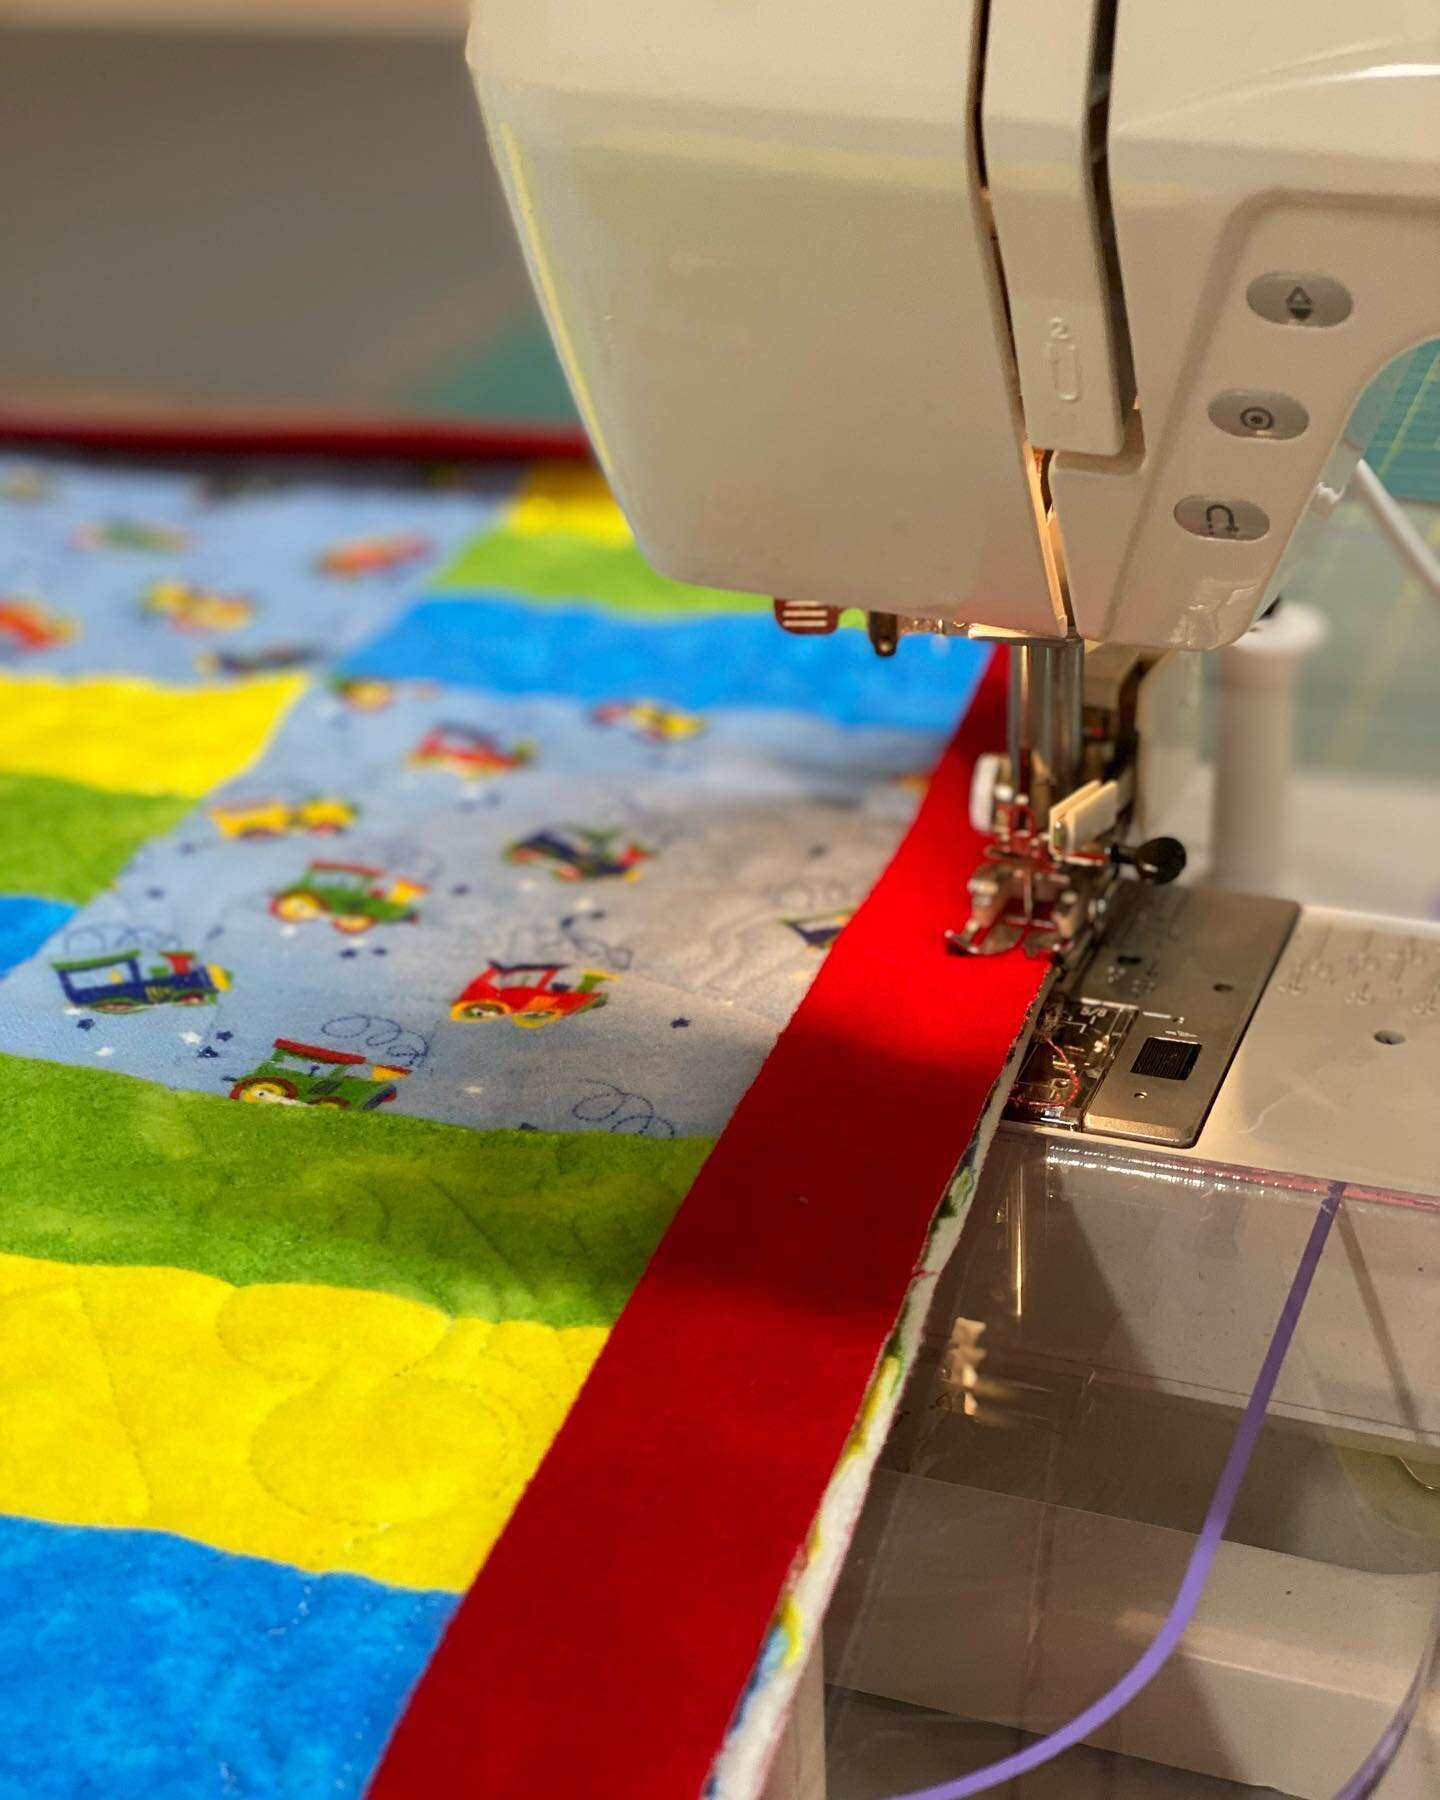 Super cute kids train quilt! I adore the rail fence pattern, it really lets you showcase the main print fabric. #longarmquilting #longarmquilter #207lq #gammill #gammillquilting #statlerstitcher #mainesmallbusiness #mainequilts #mainequilters #longar